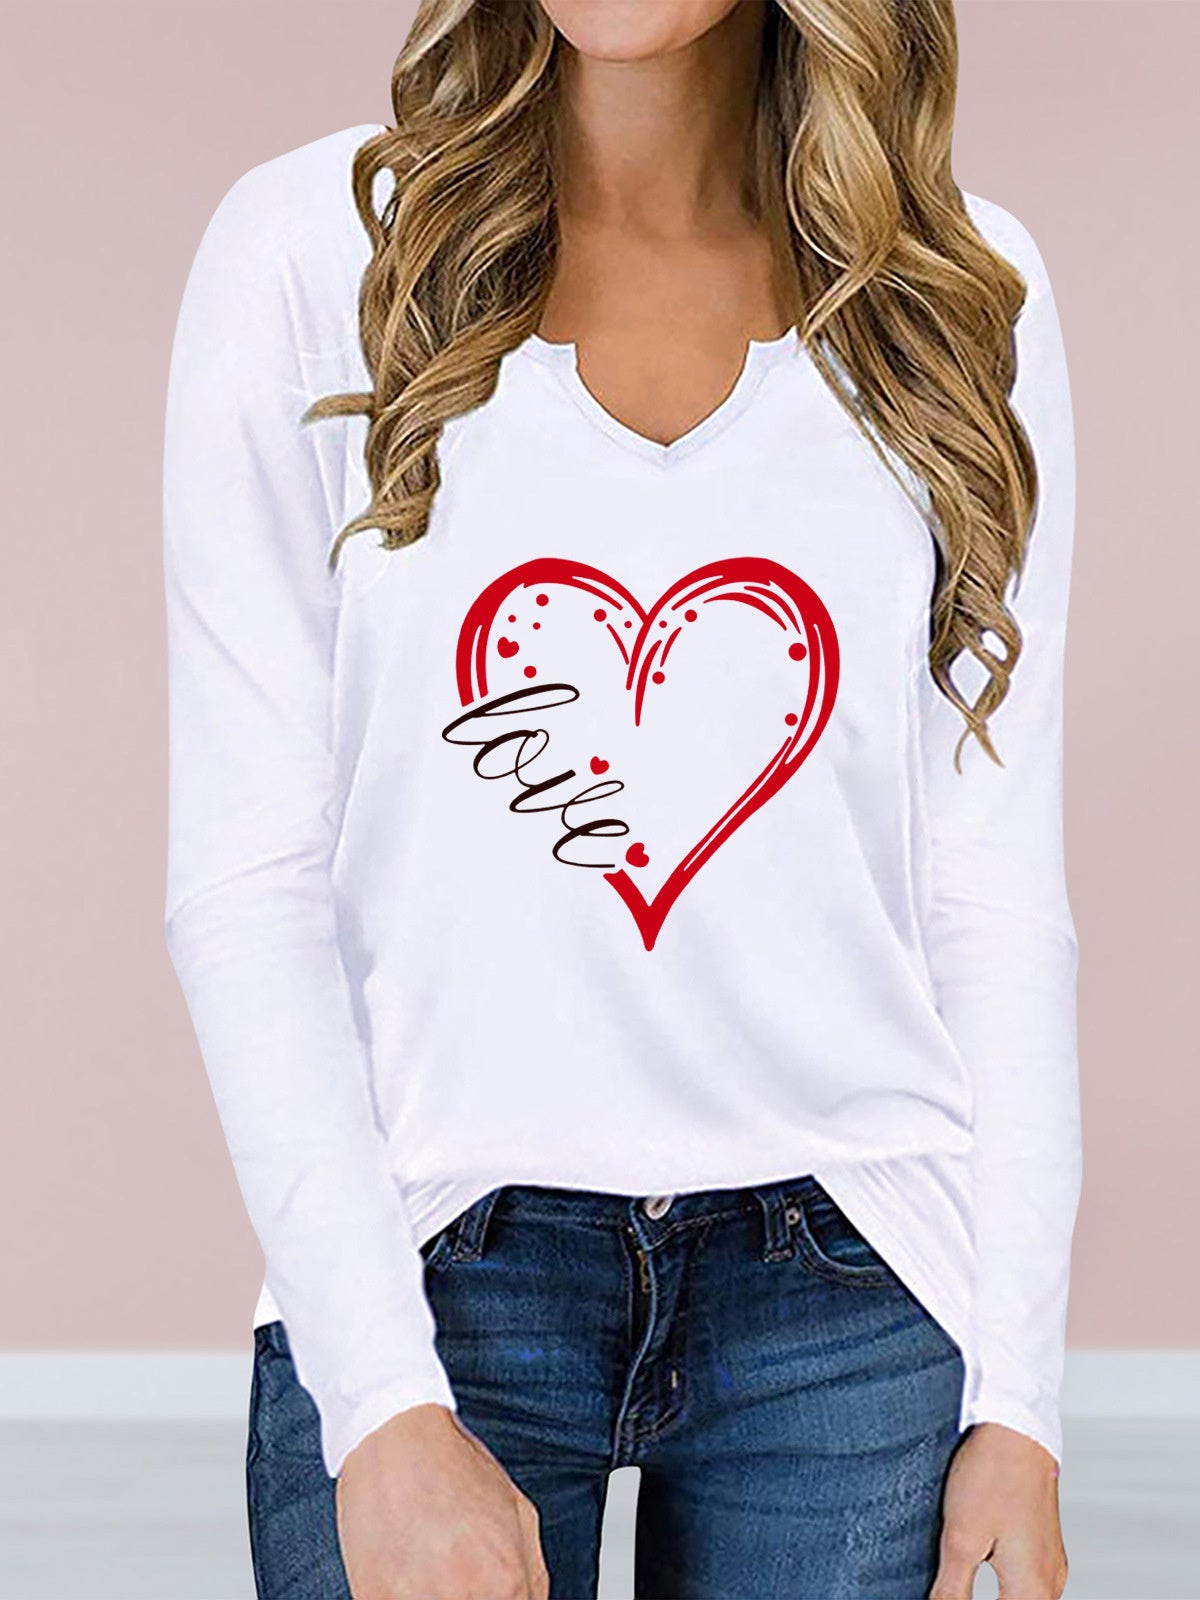 Women's V-neck Long Sleeve Graphic Printed Top